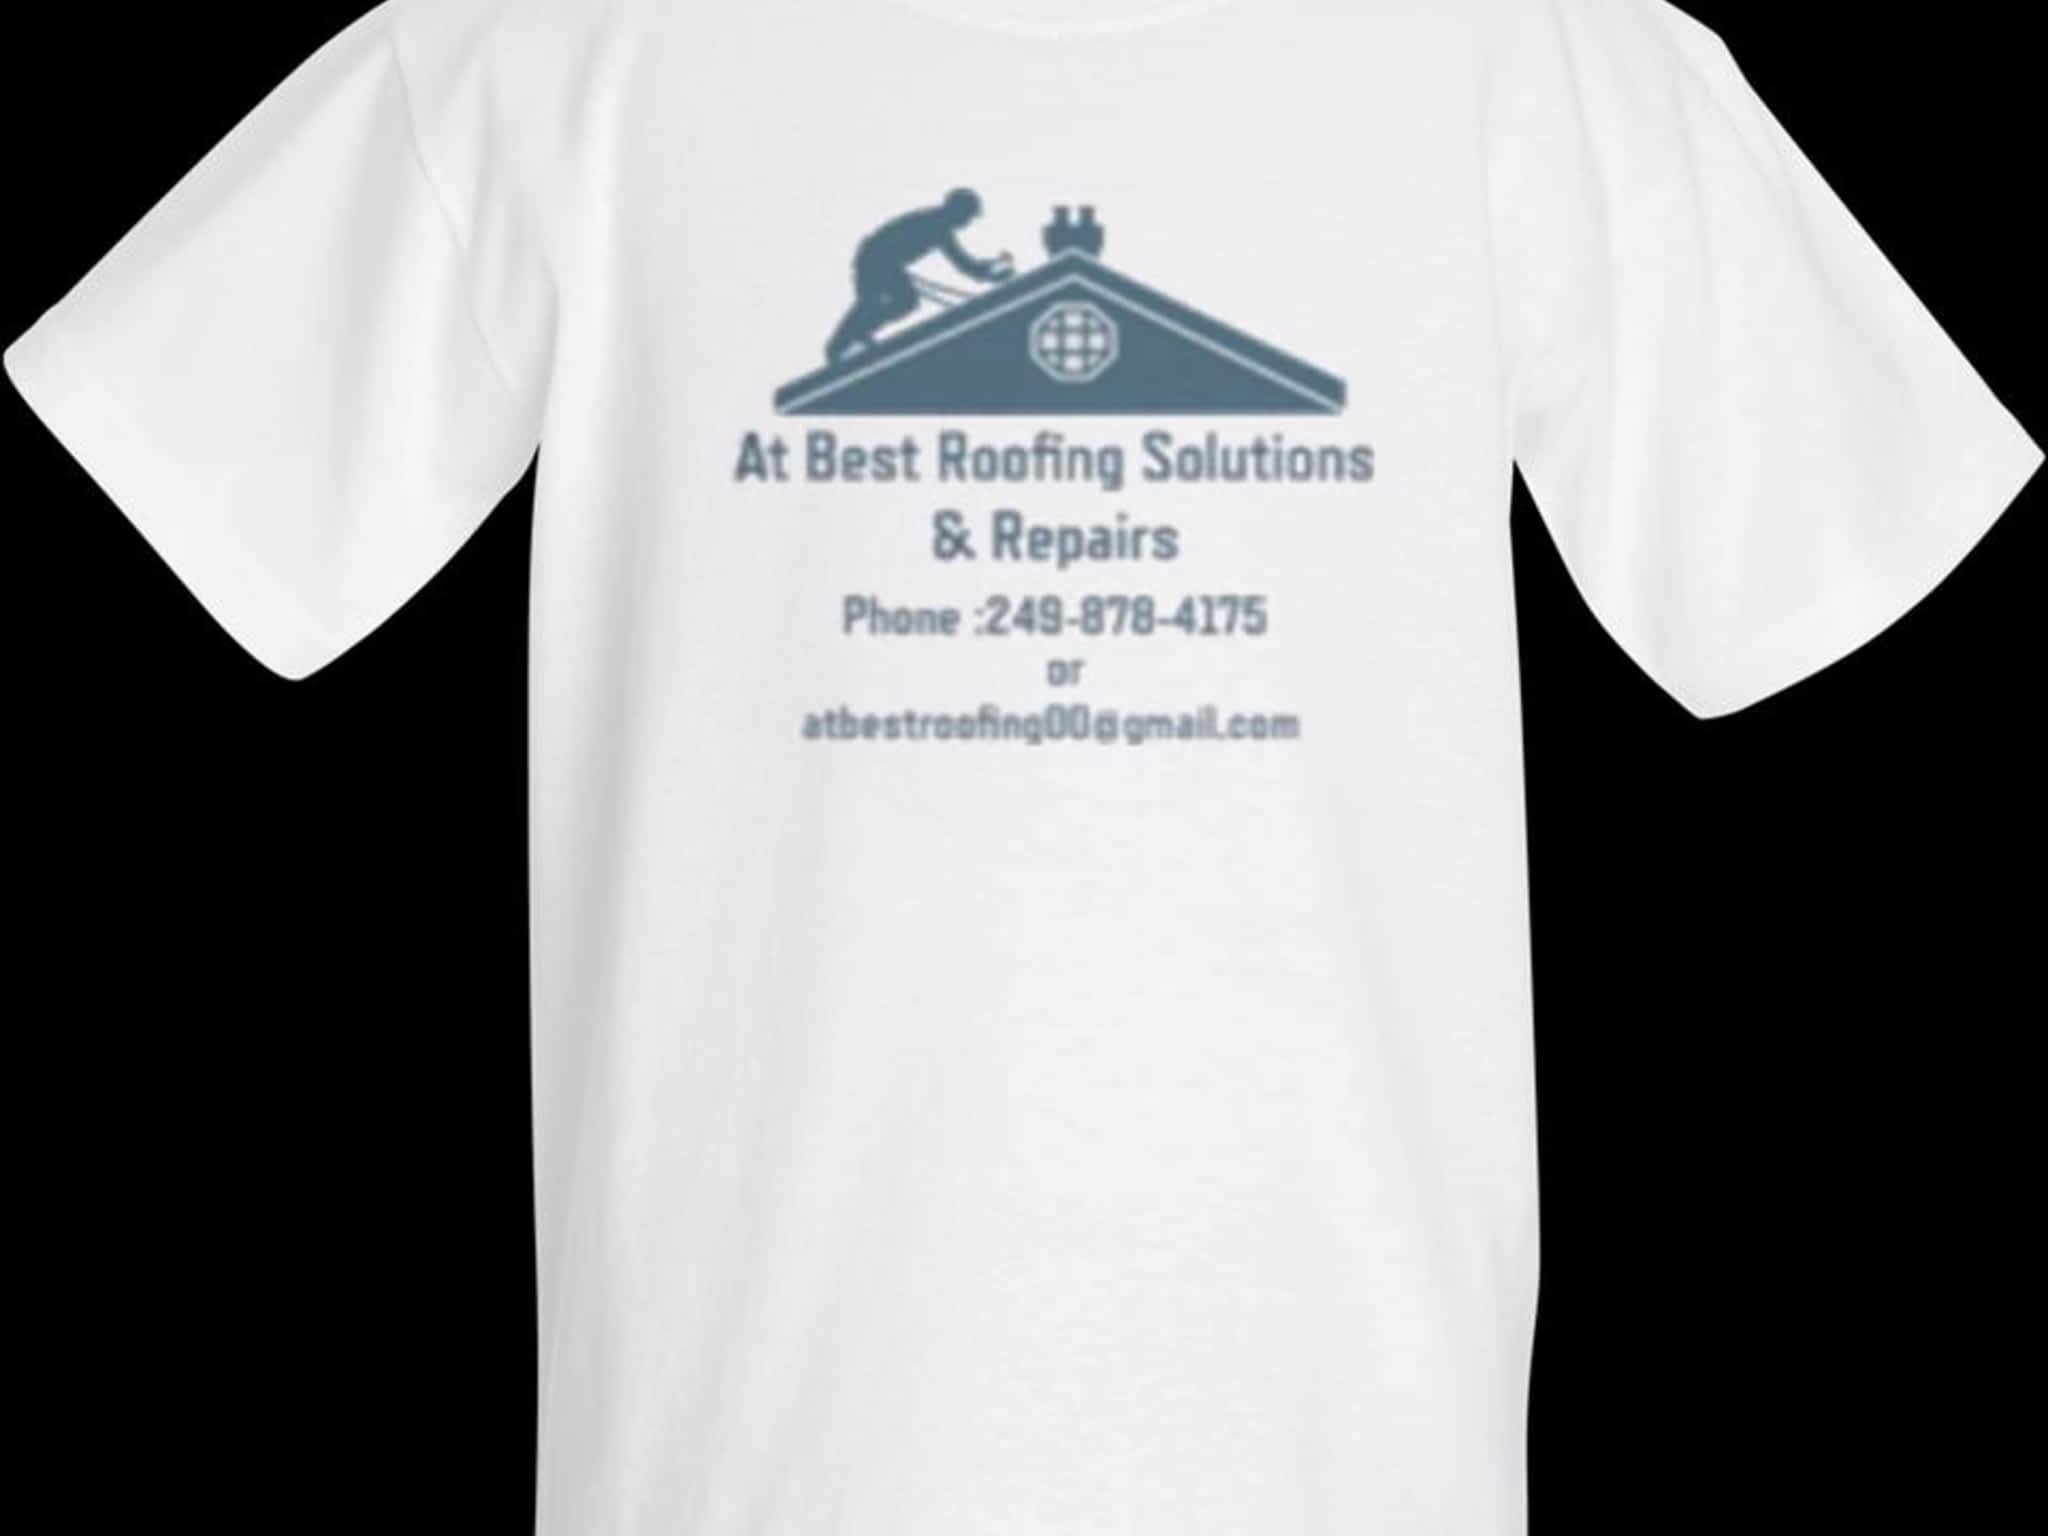 photo At Best Roofing Solutions & Repairs